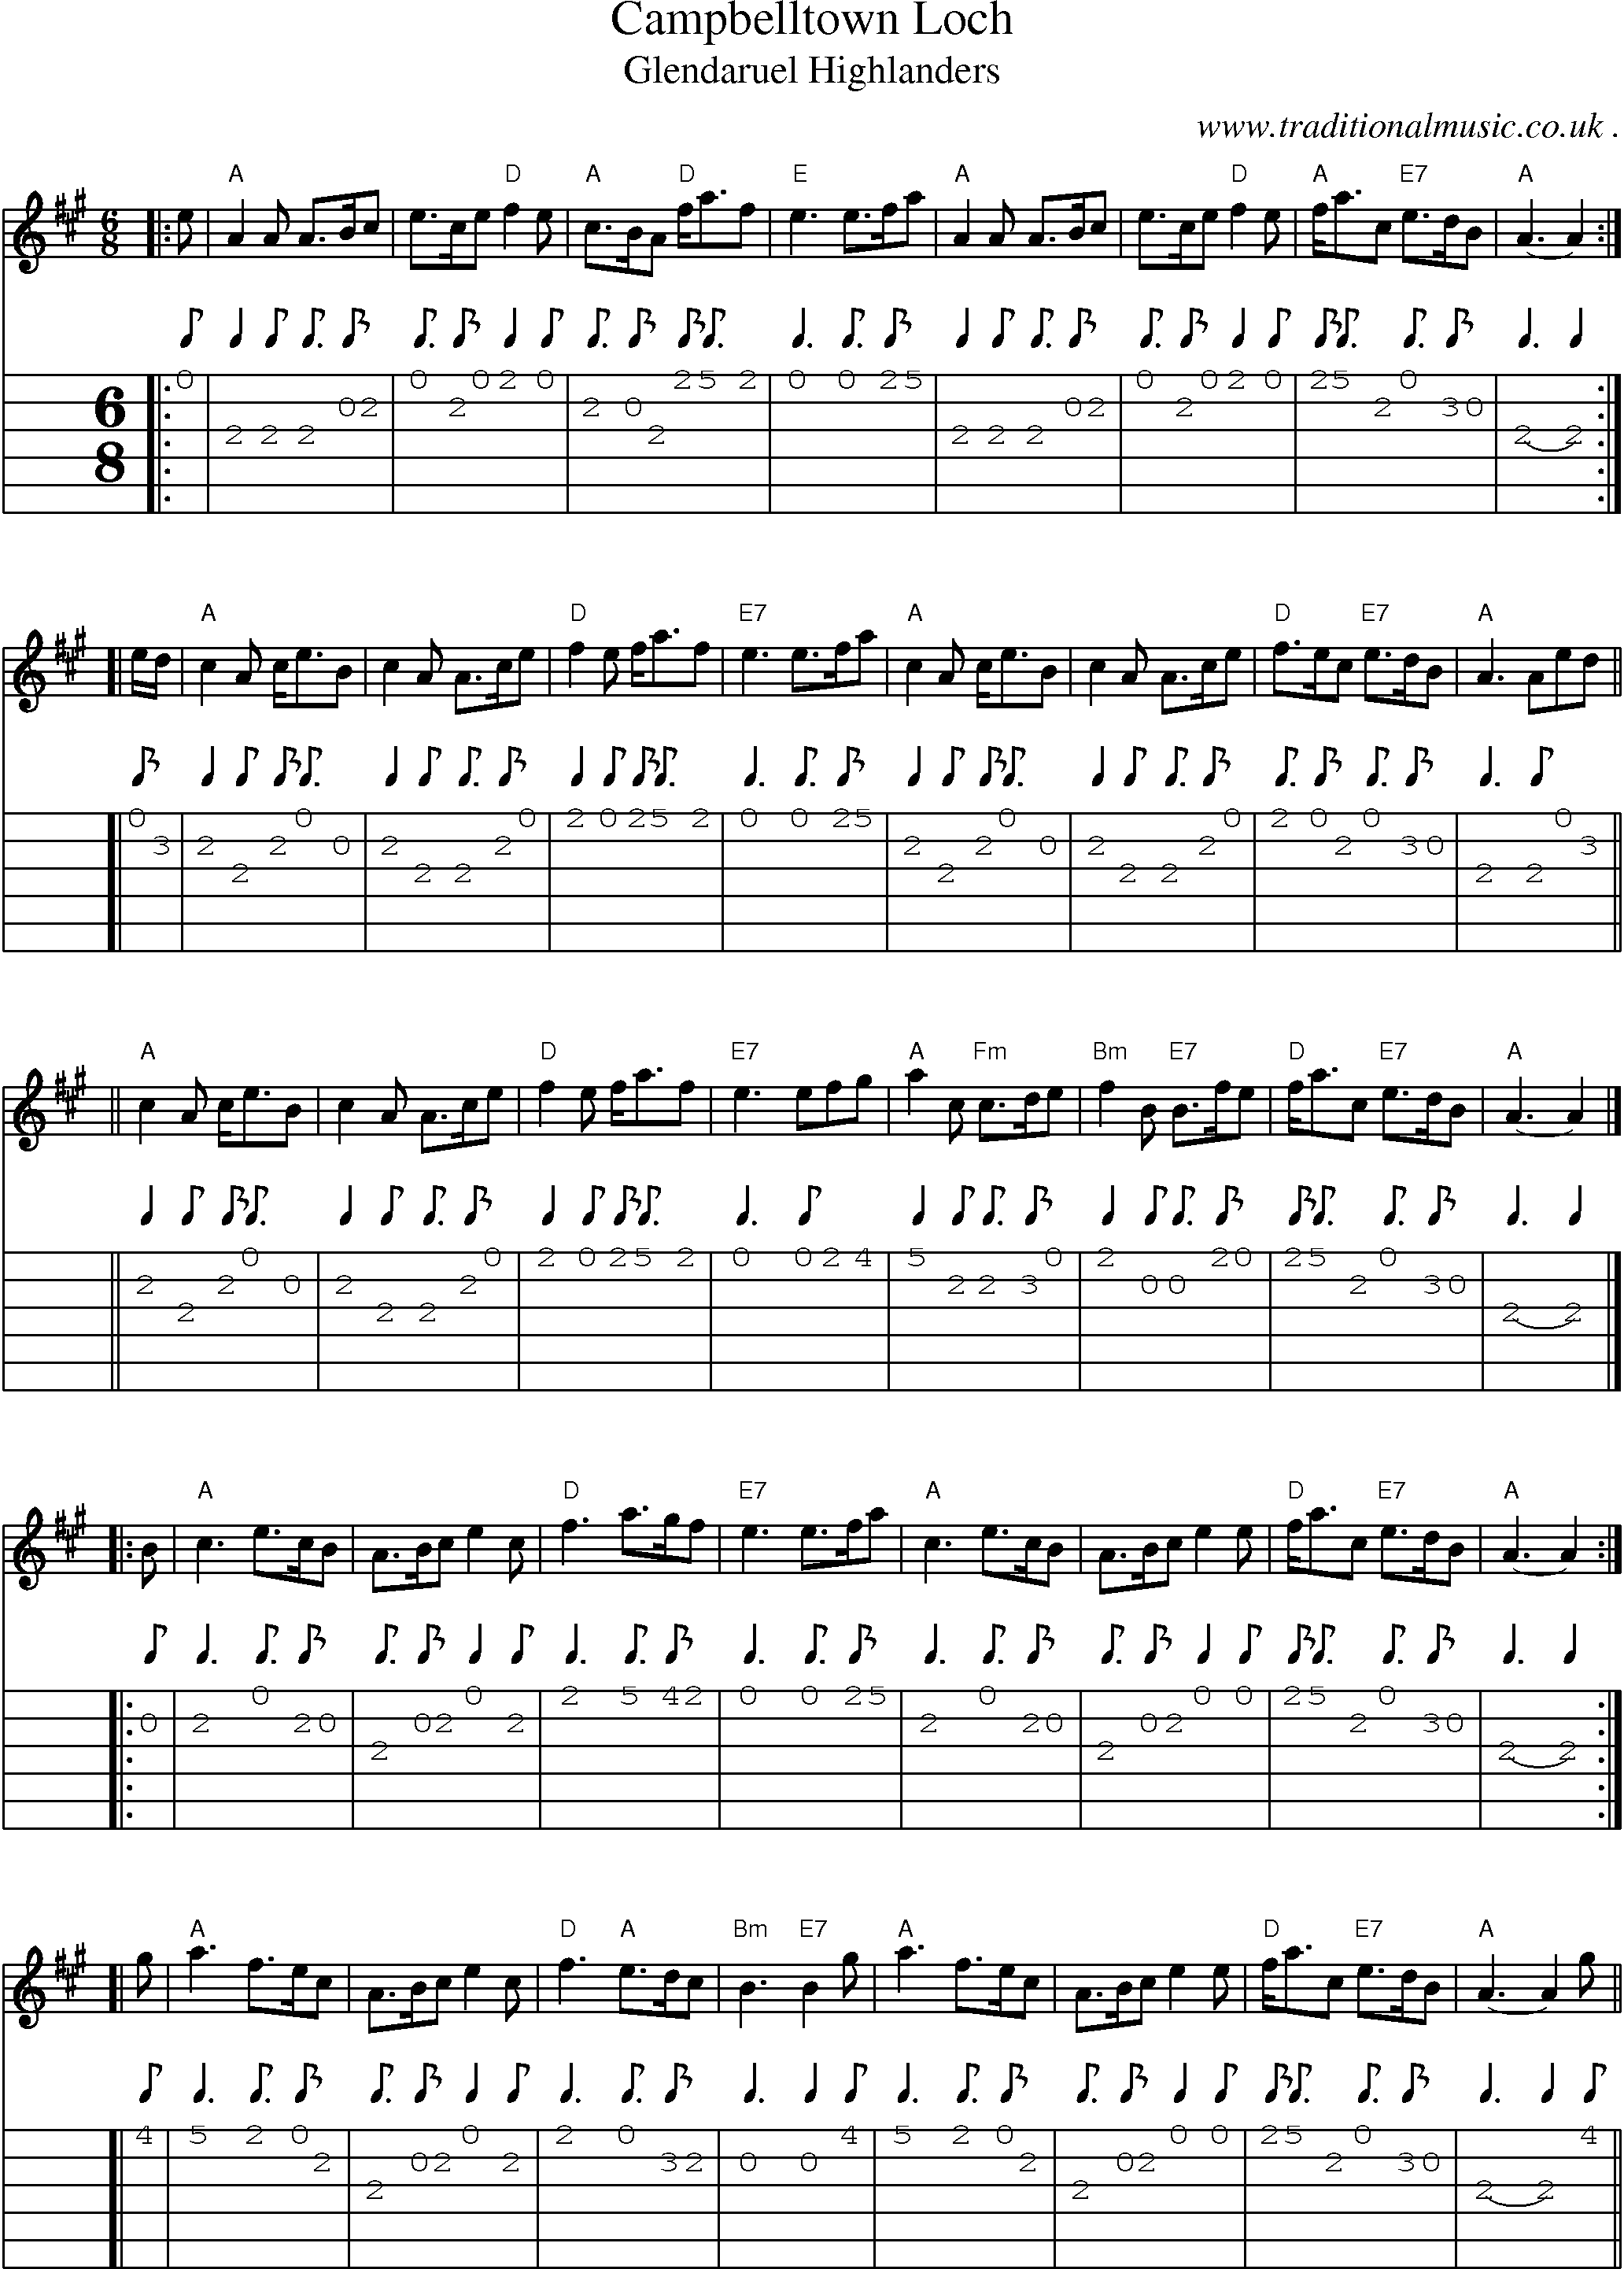 Sheet-music  score, Chords and Guitar Tabs for Campbelltown Loch